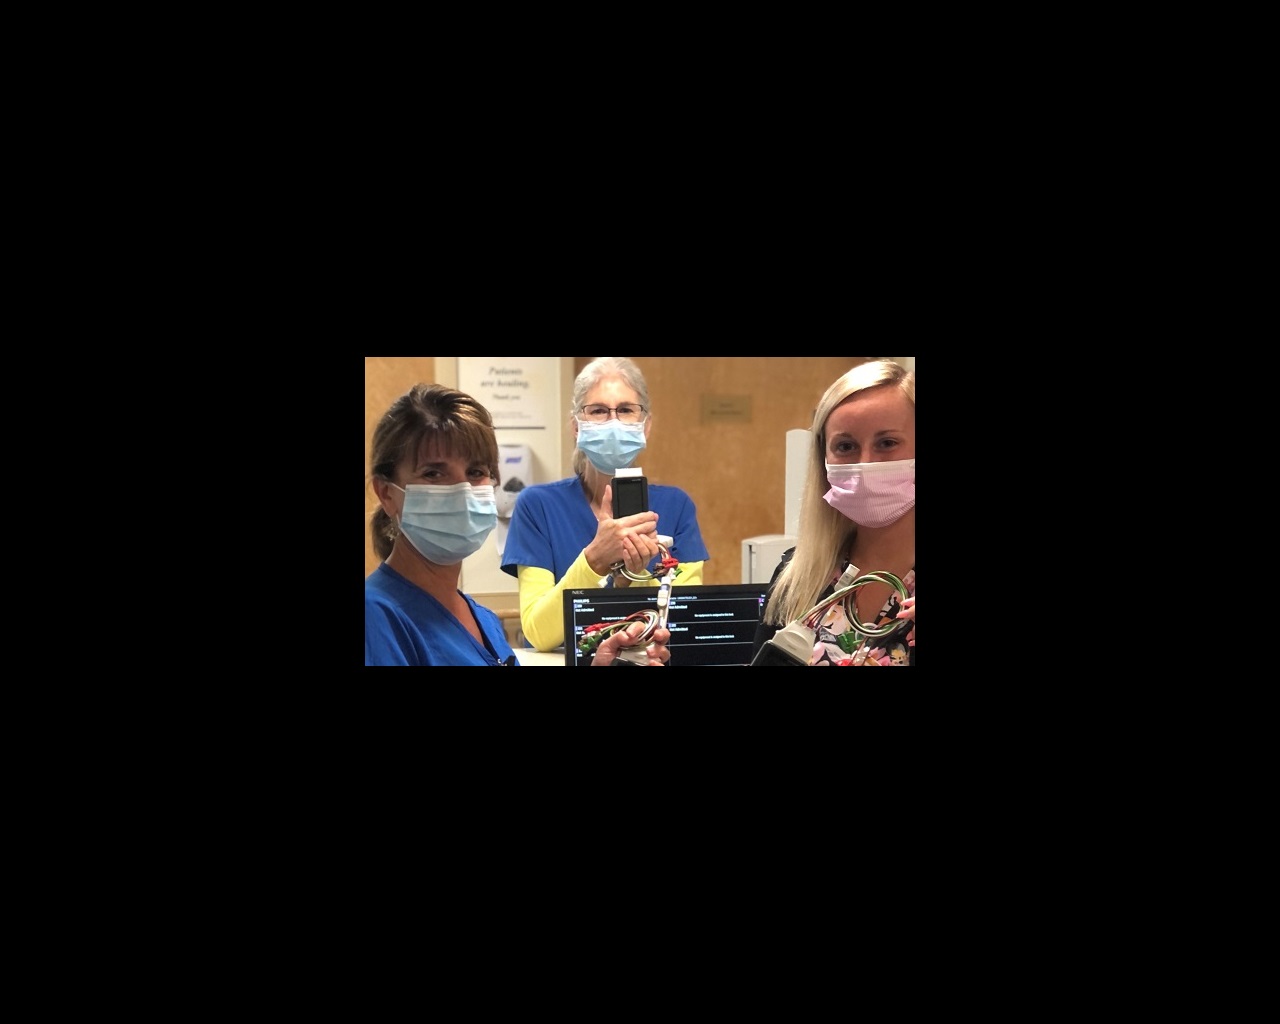 Three women are standing and showing off new handheld hospital critical care equipment. They are smiling behind their masks.